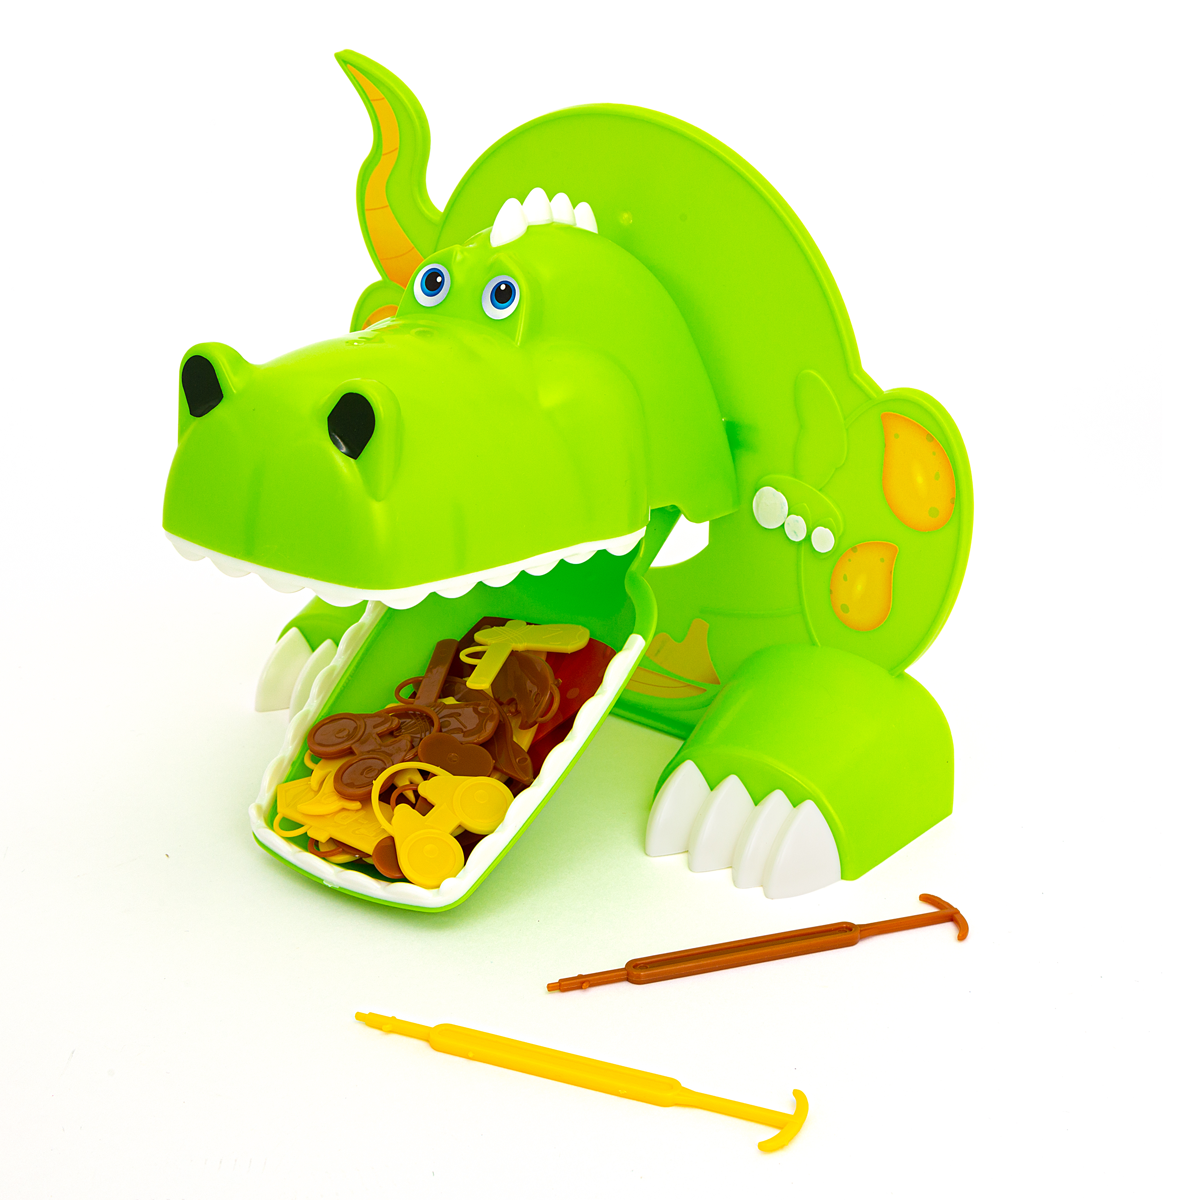 Play and Win T-Rex Chomp Game